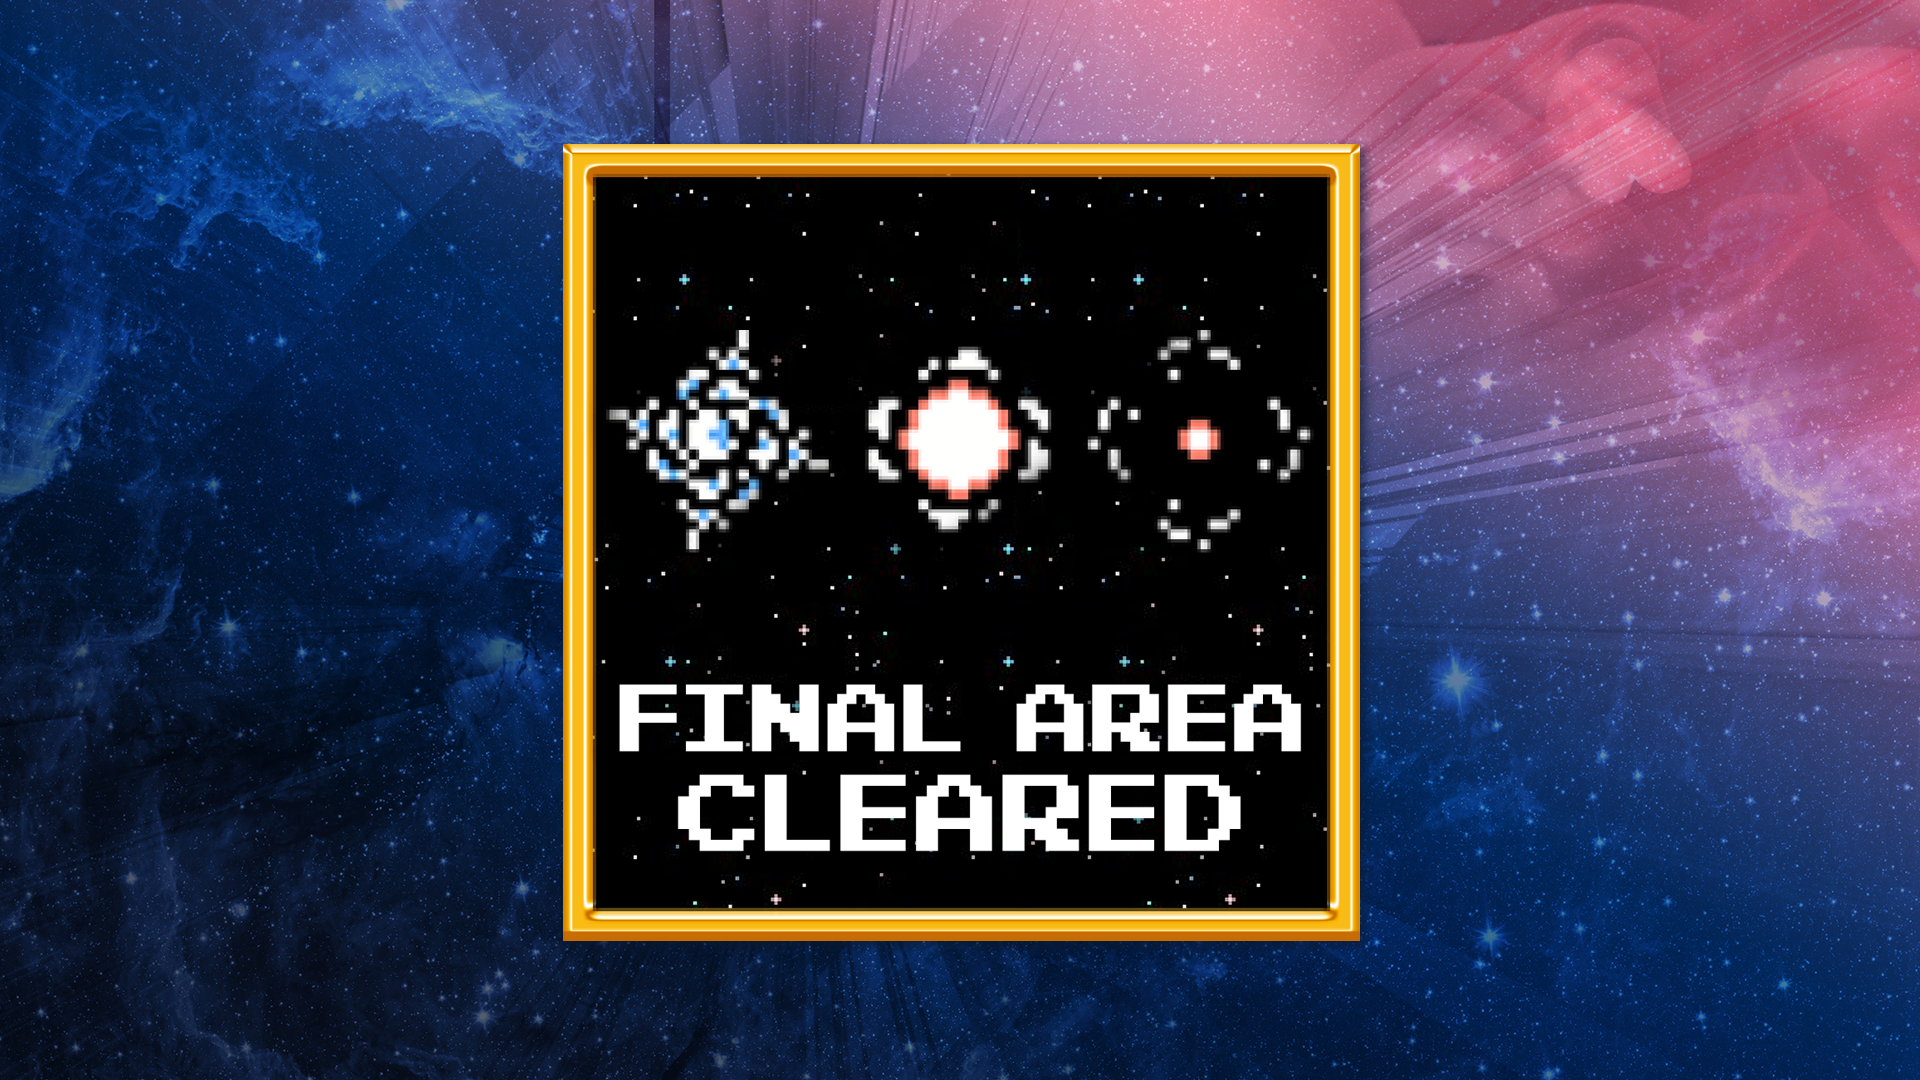 Icon for Image Fight (Arcade) - Final Area Cleared